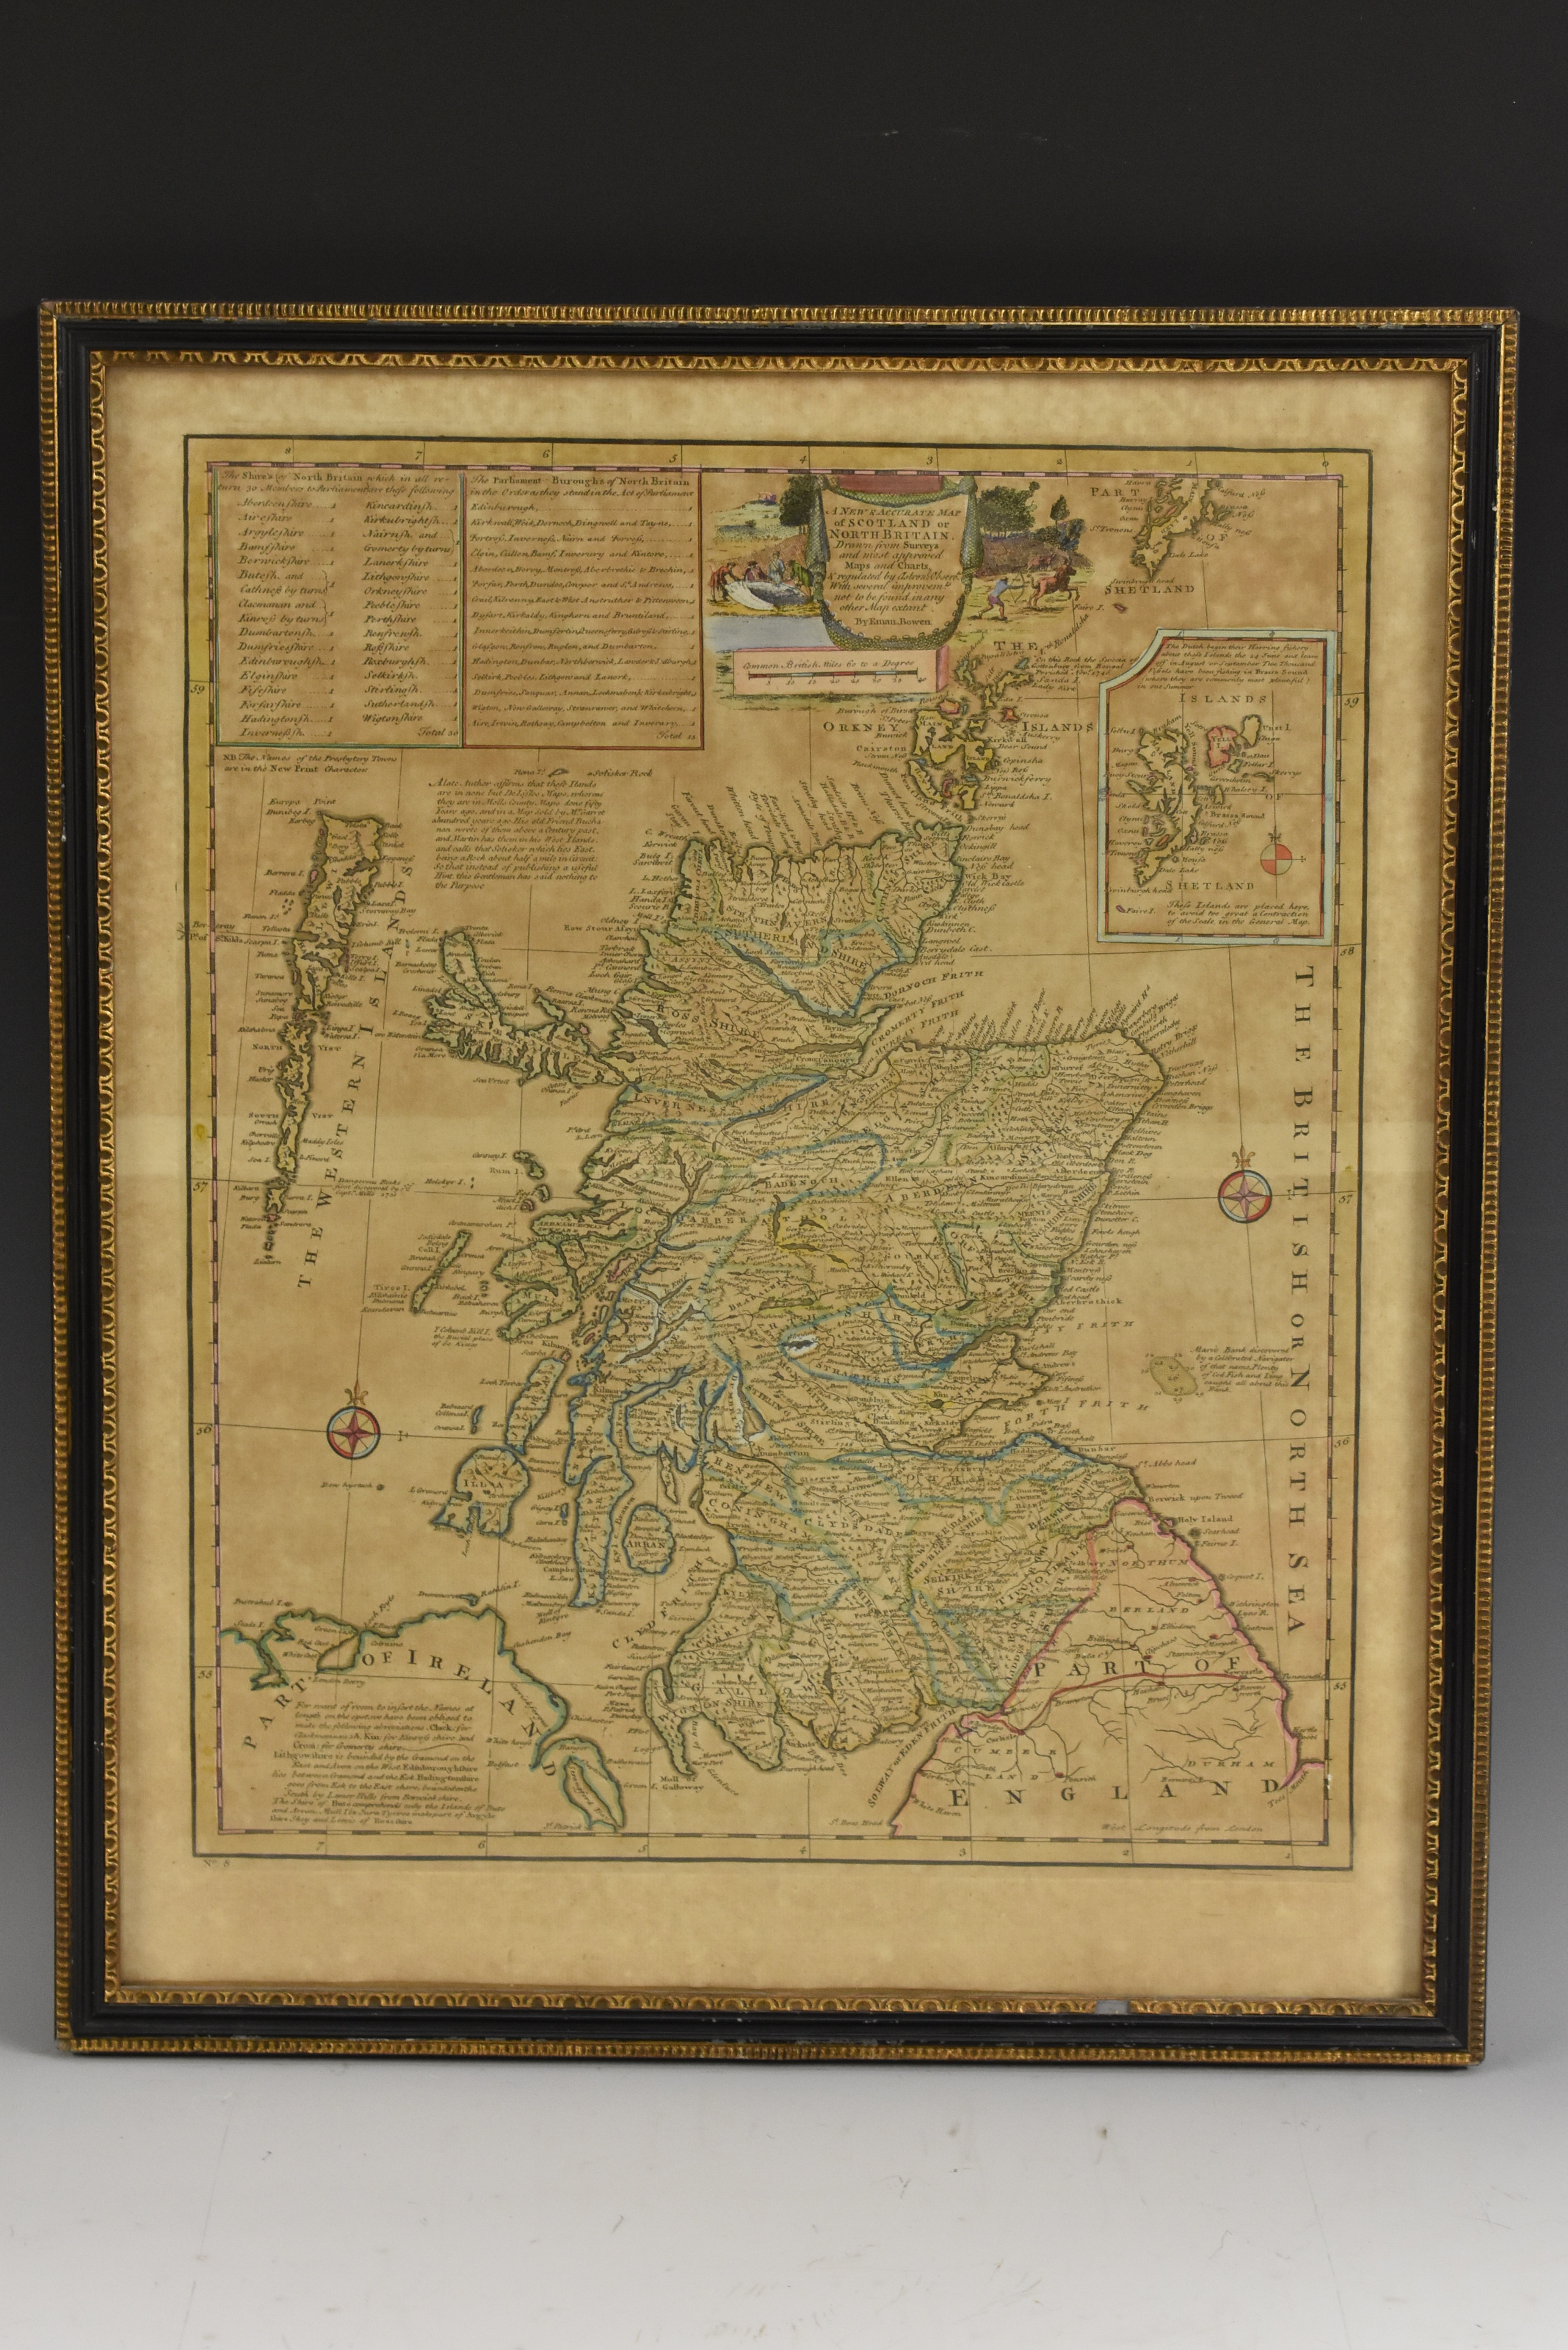 Emanuel Bowen (1694 - 1767), a two-fold map, A New Accurate Map of Scotland or North Britain,